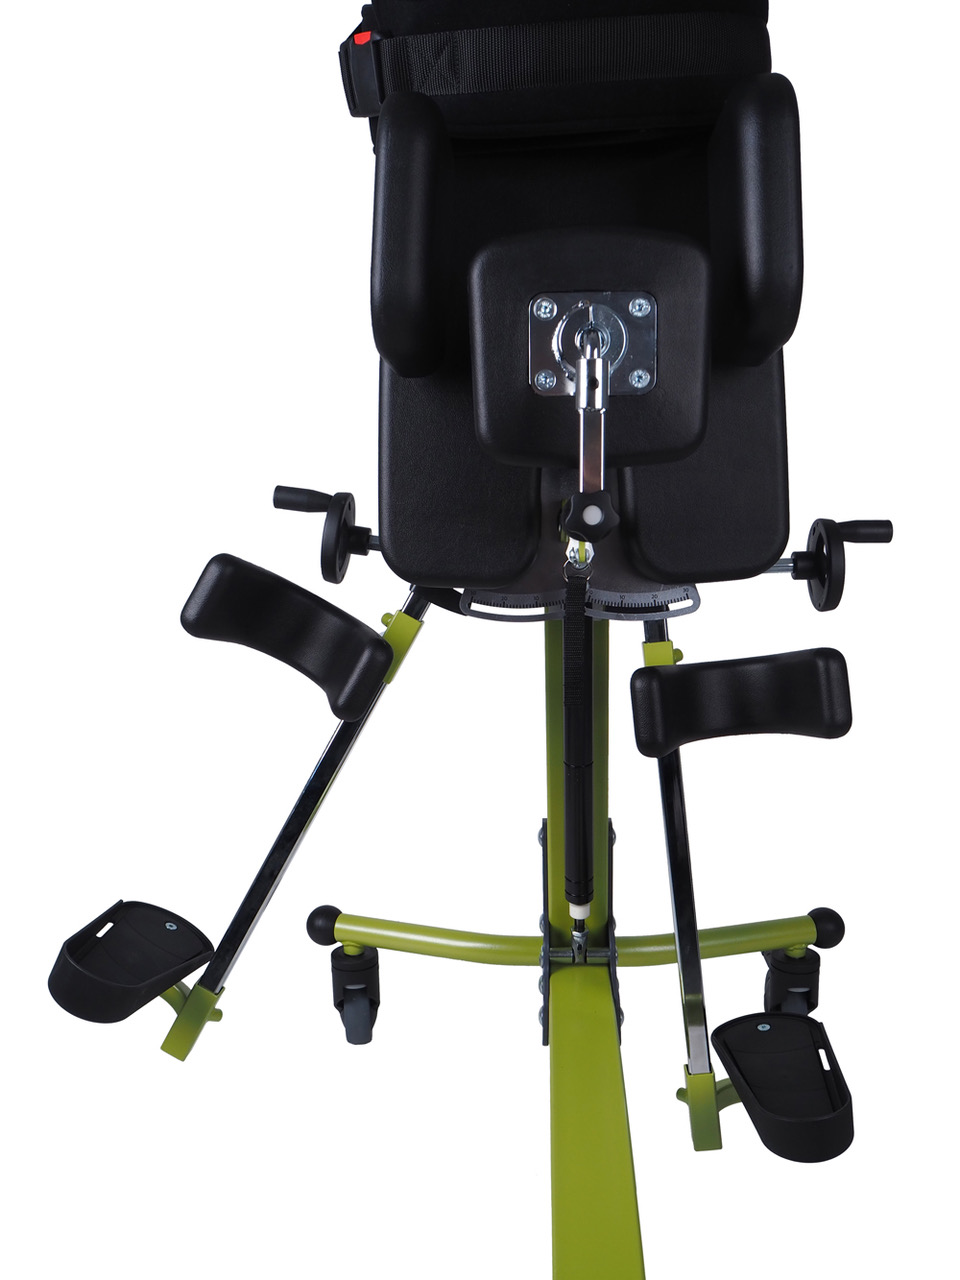 Green frame COCO stander with black cushioning in showing abduction stirrups.